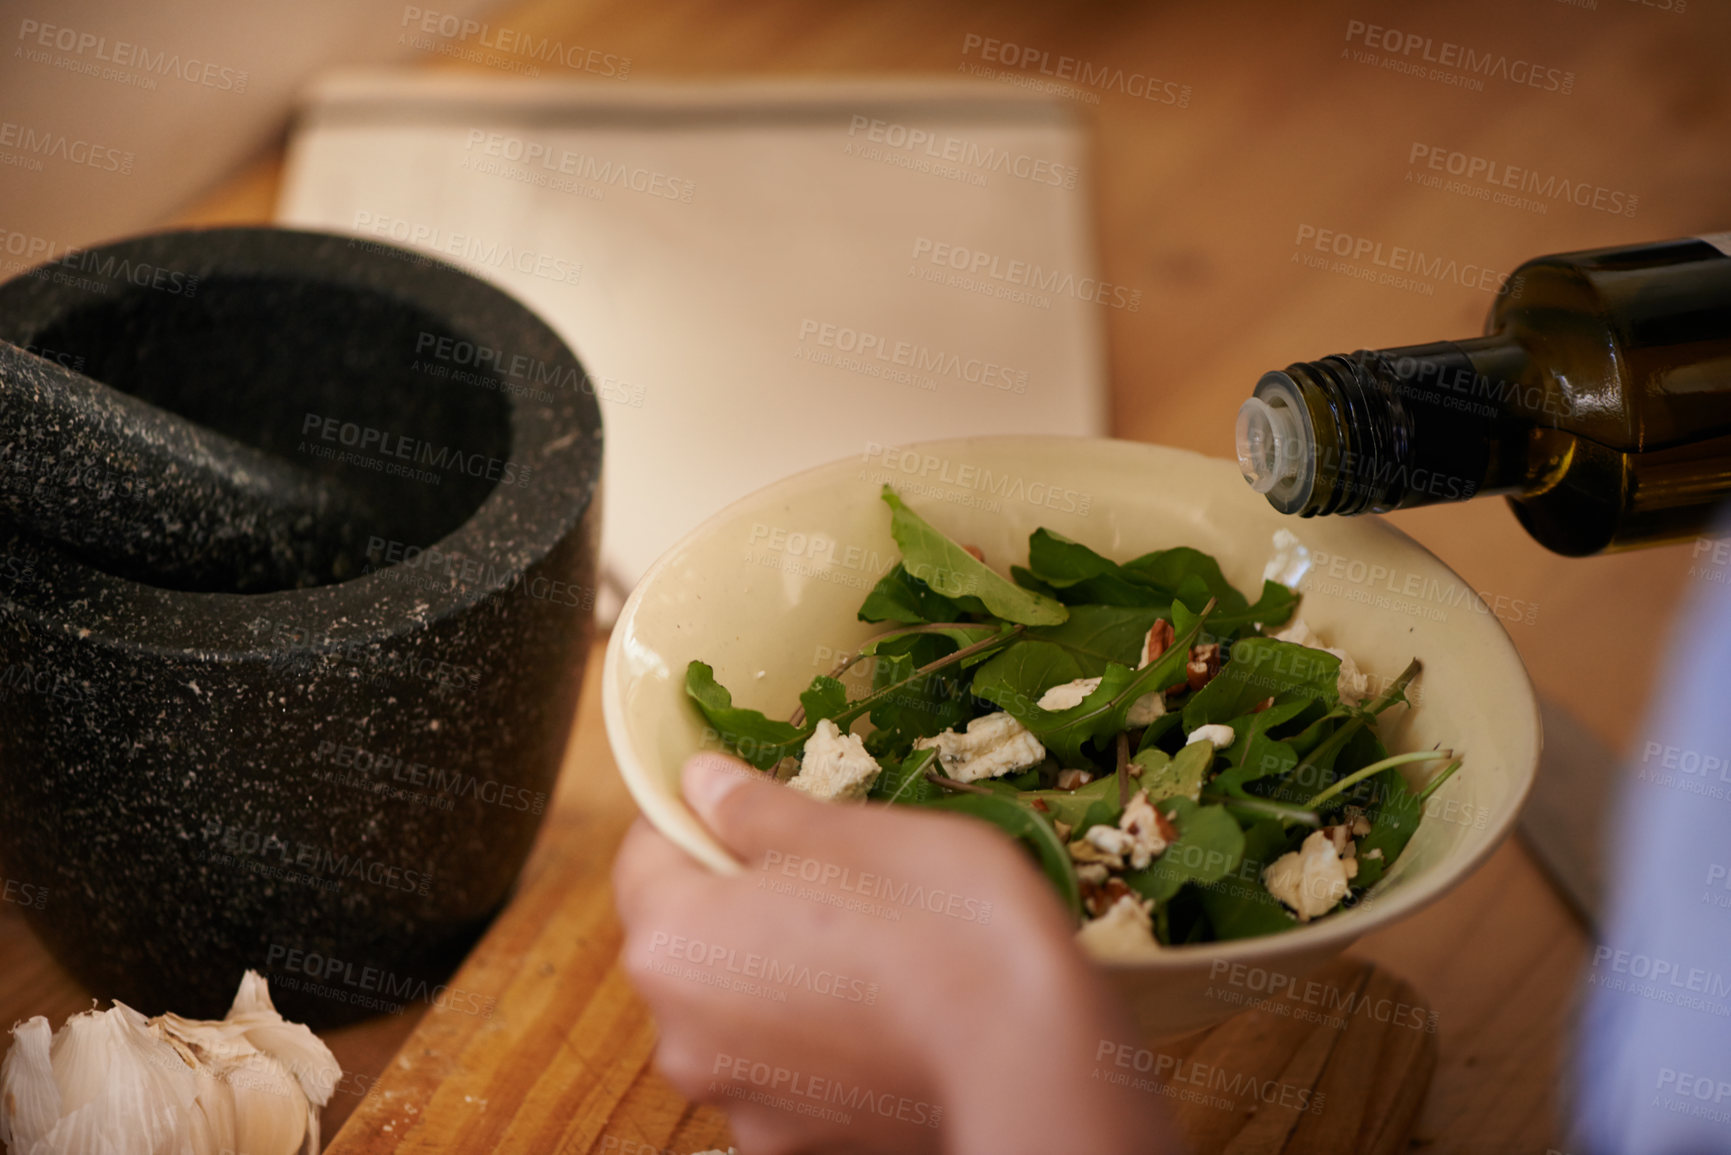 Buy stock photo Salad, olive oil and hand with bowl for healthy food, eating meal of leaves or lettuce with cheese in kitchen. Person cooking, hungry and preparing dish with ingredients, vegetables and dressing